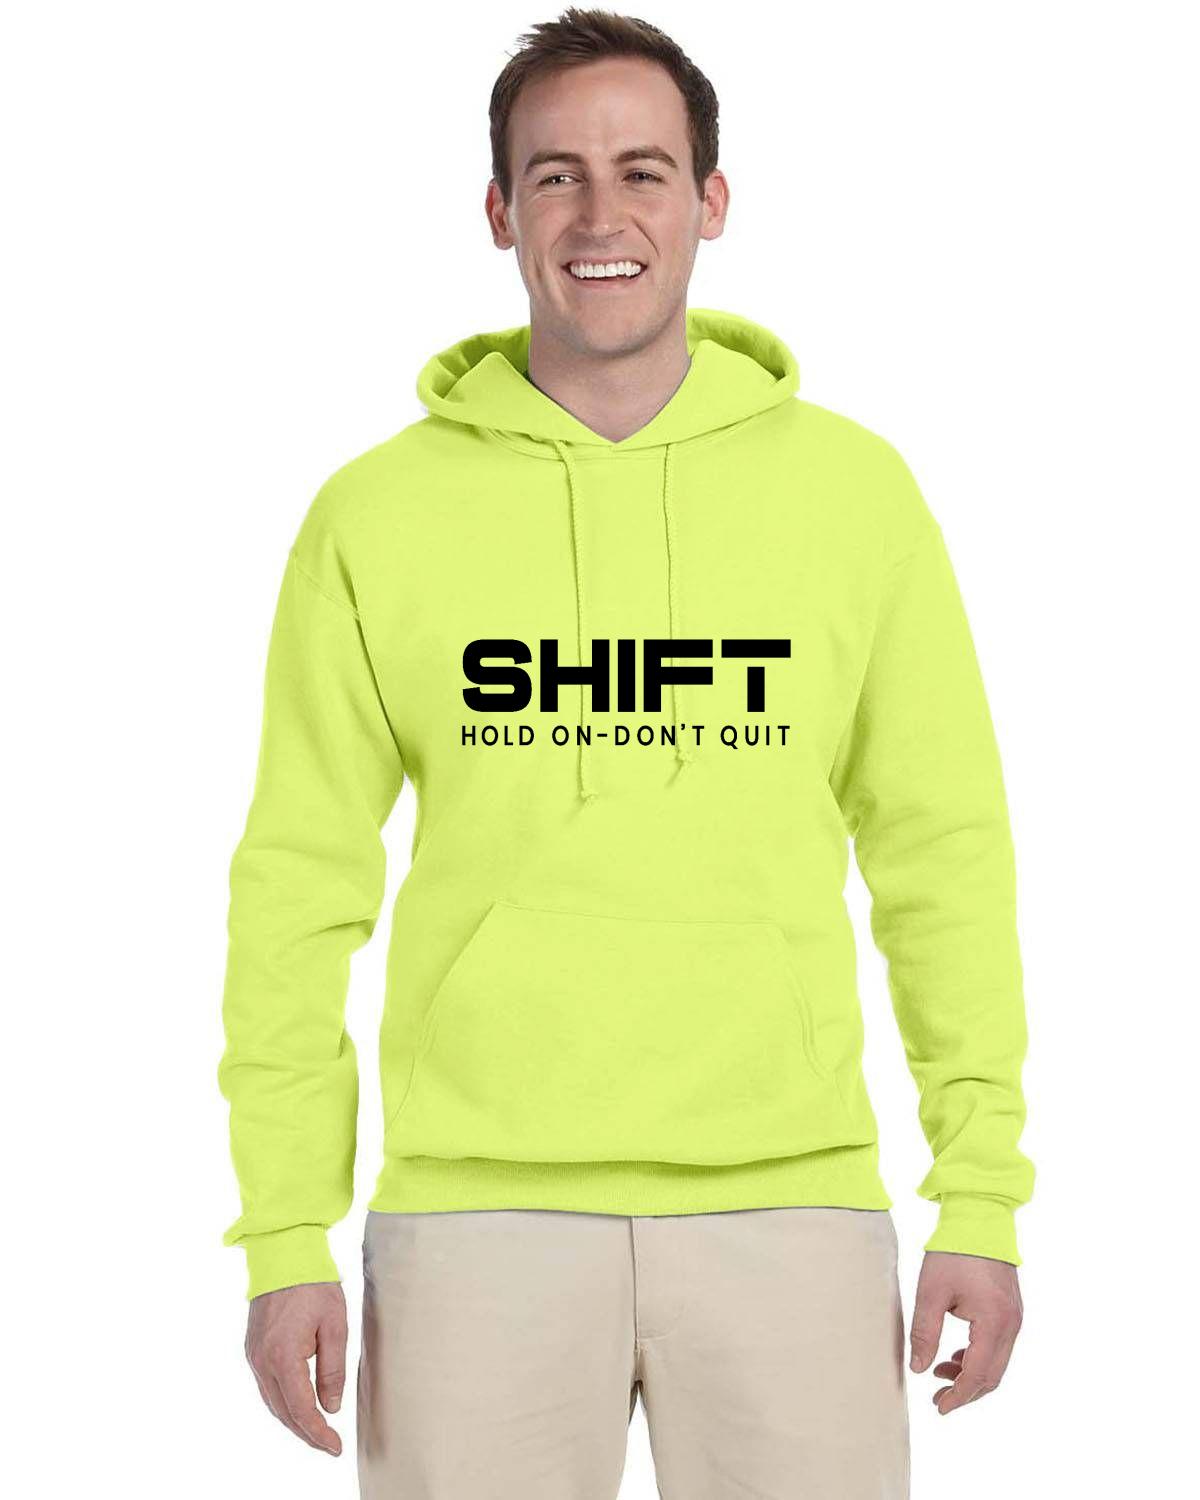 Shift Hold On-Don't Quit Fleece Pullover Hooded Sweatshirt